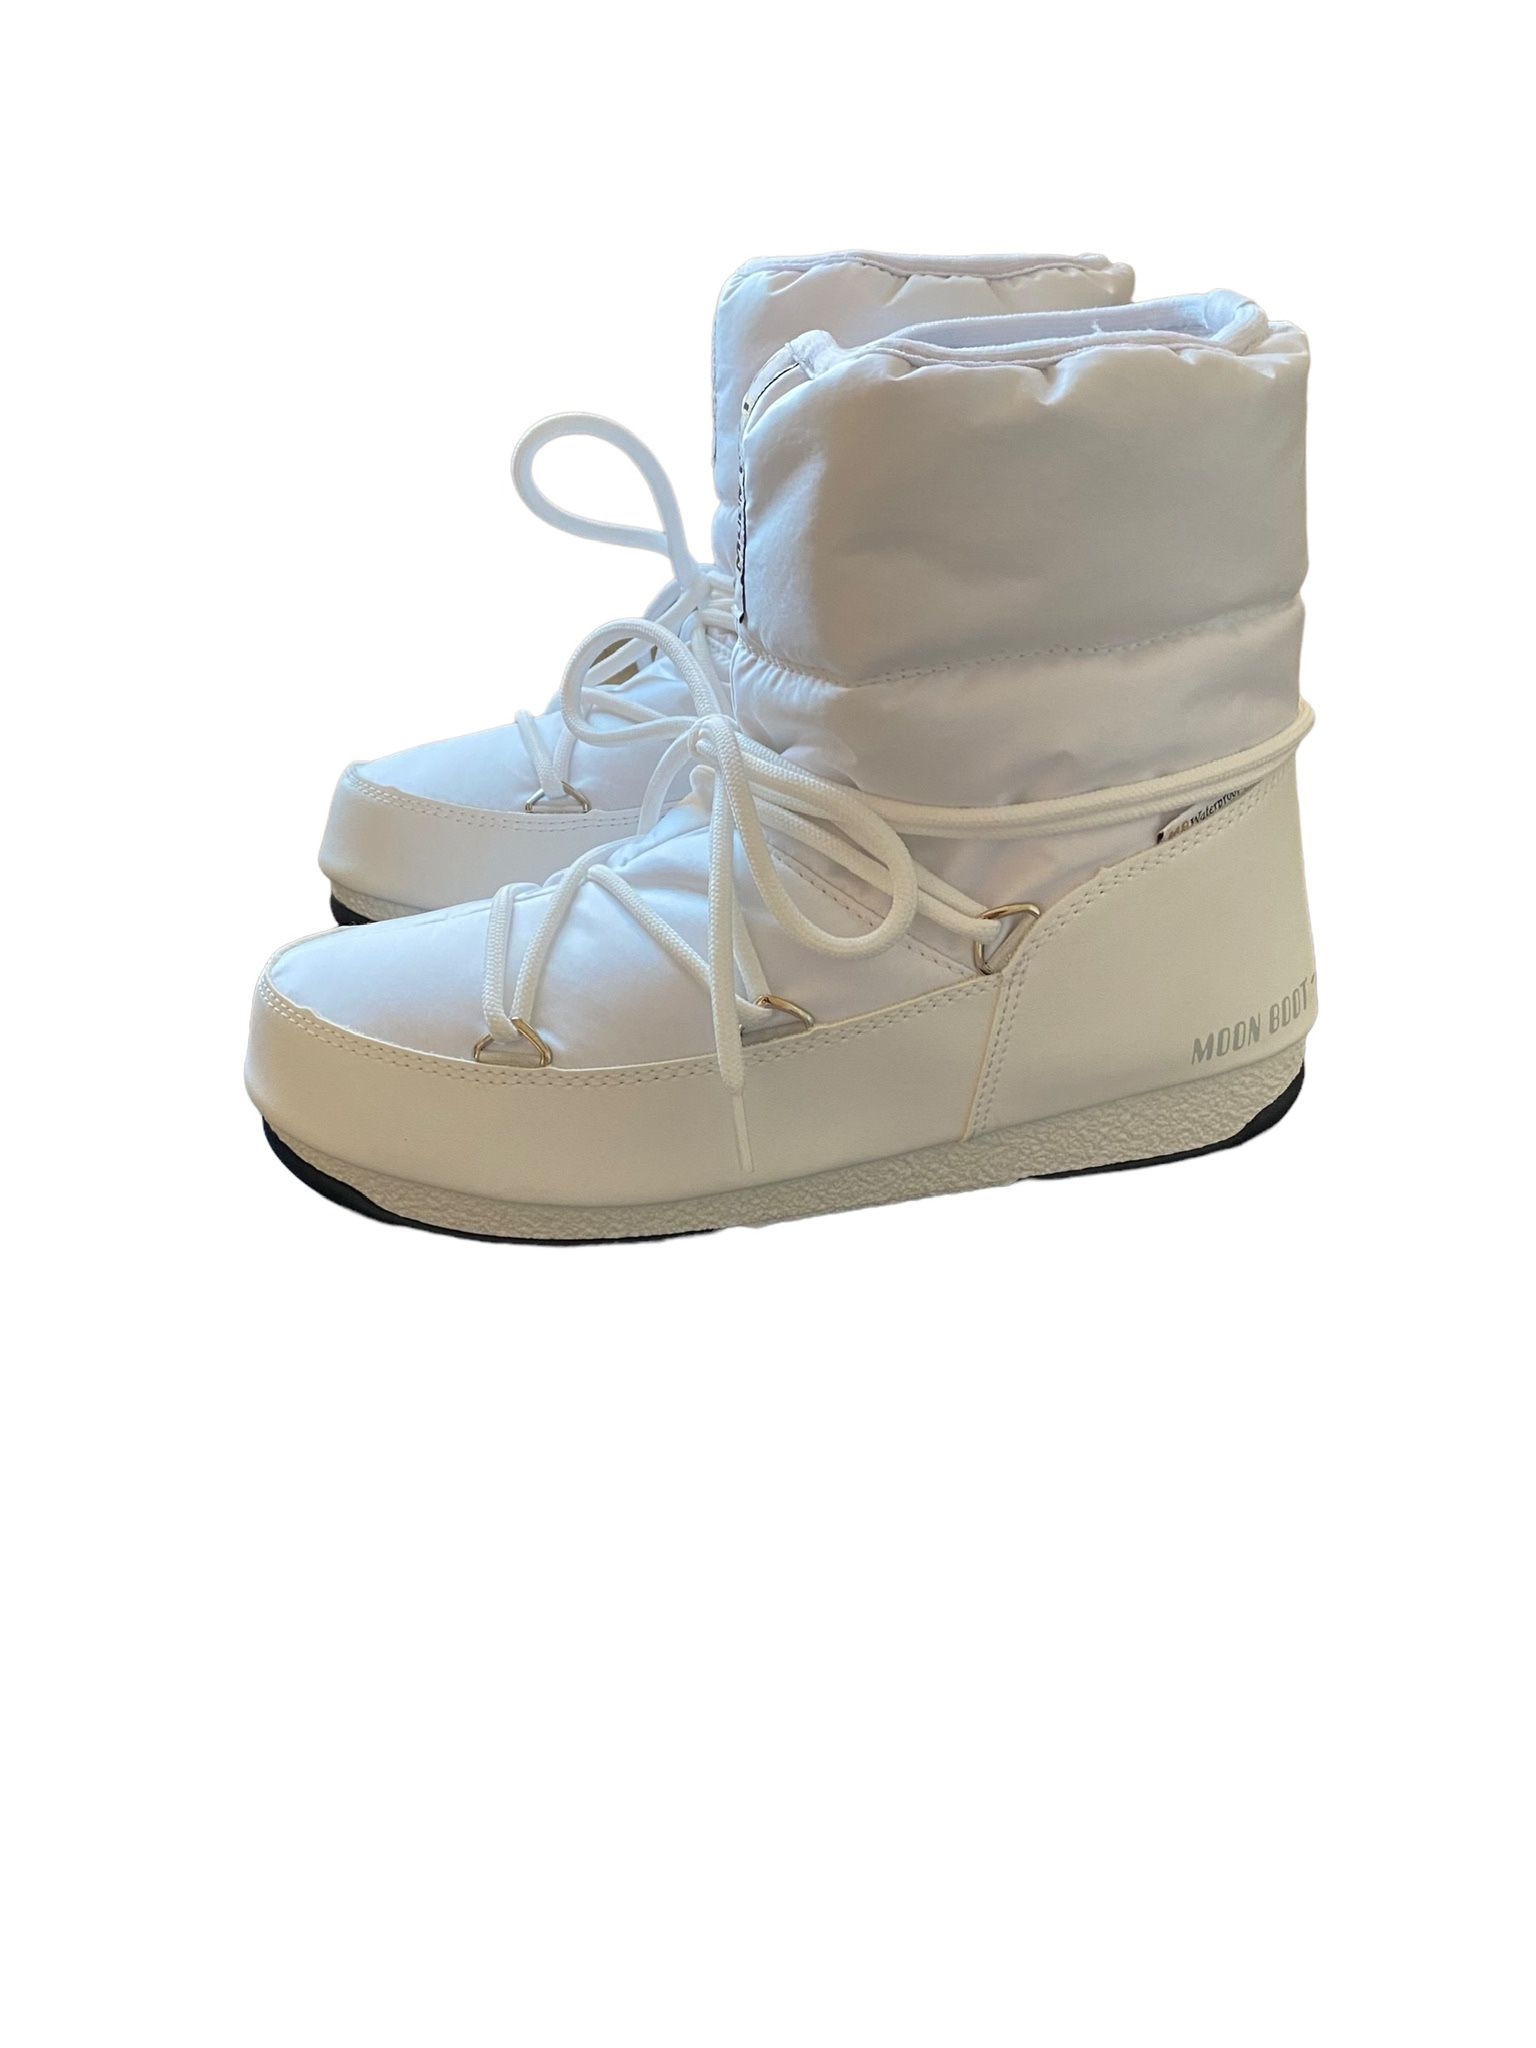 New auth BOOT Low Nylon WP 2 Bootie in White size 40/runs for Sale in Los Angeles, CA - OfferUp